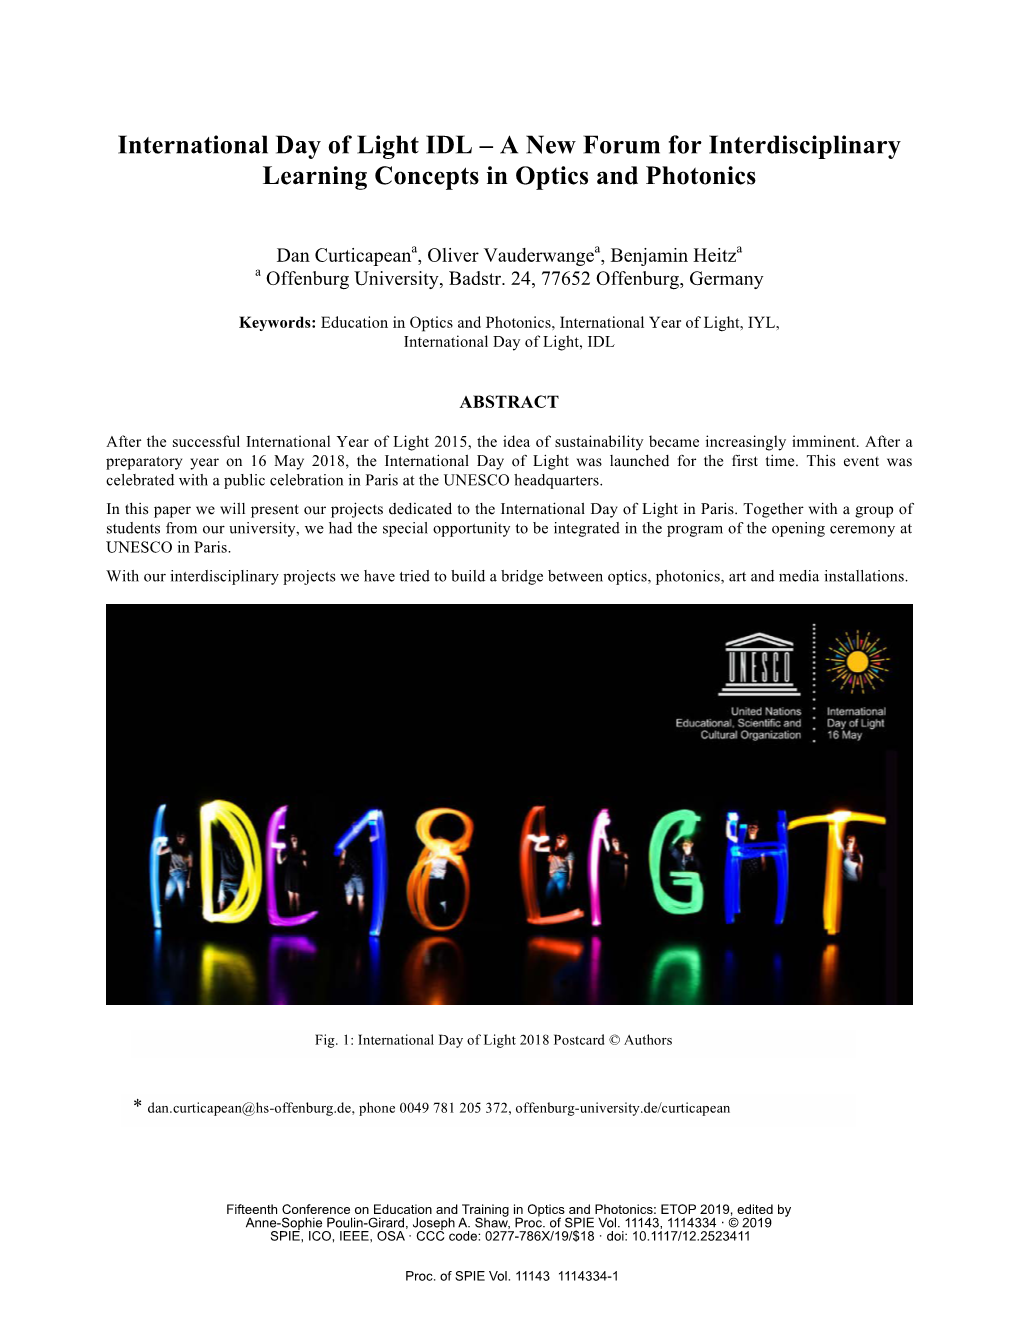 A New Forum for Interdisciplinary Learning Concepts in Optics and Photonics